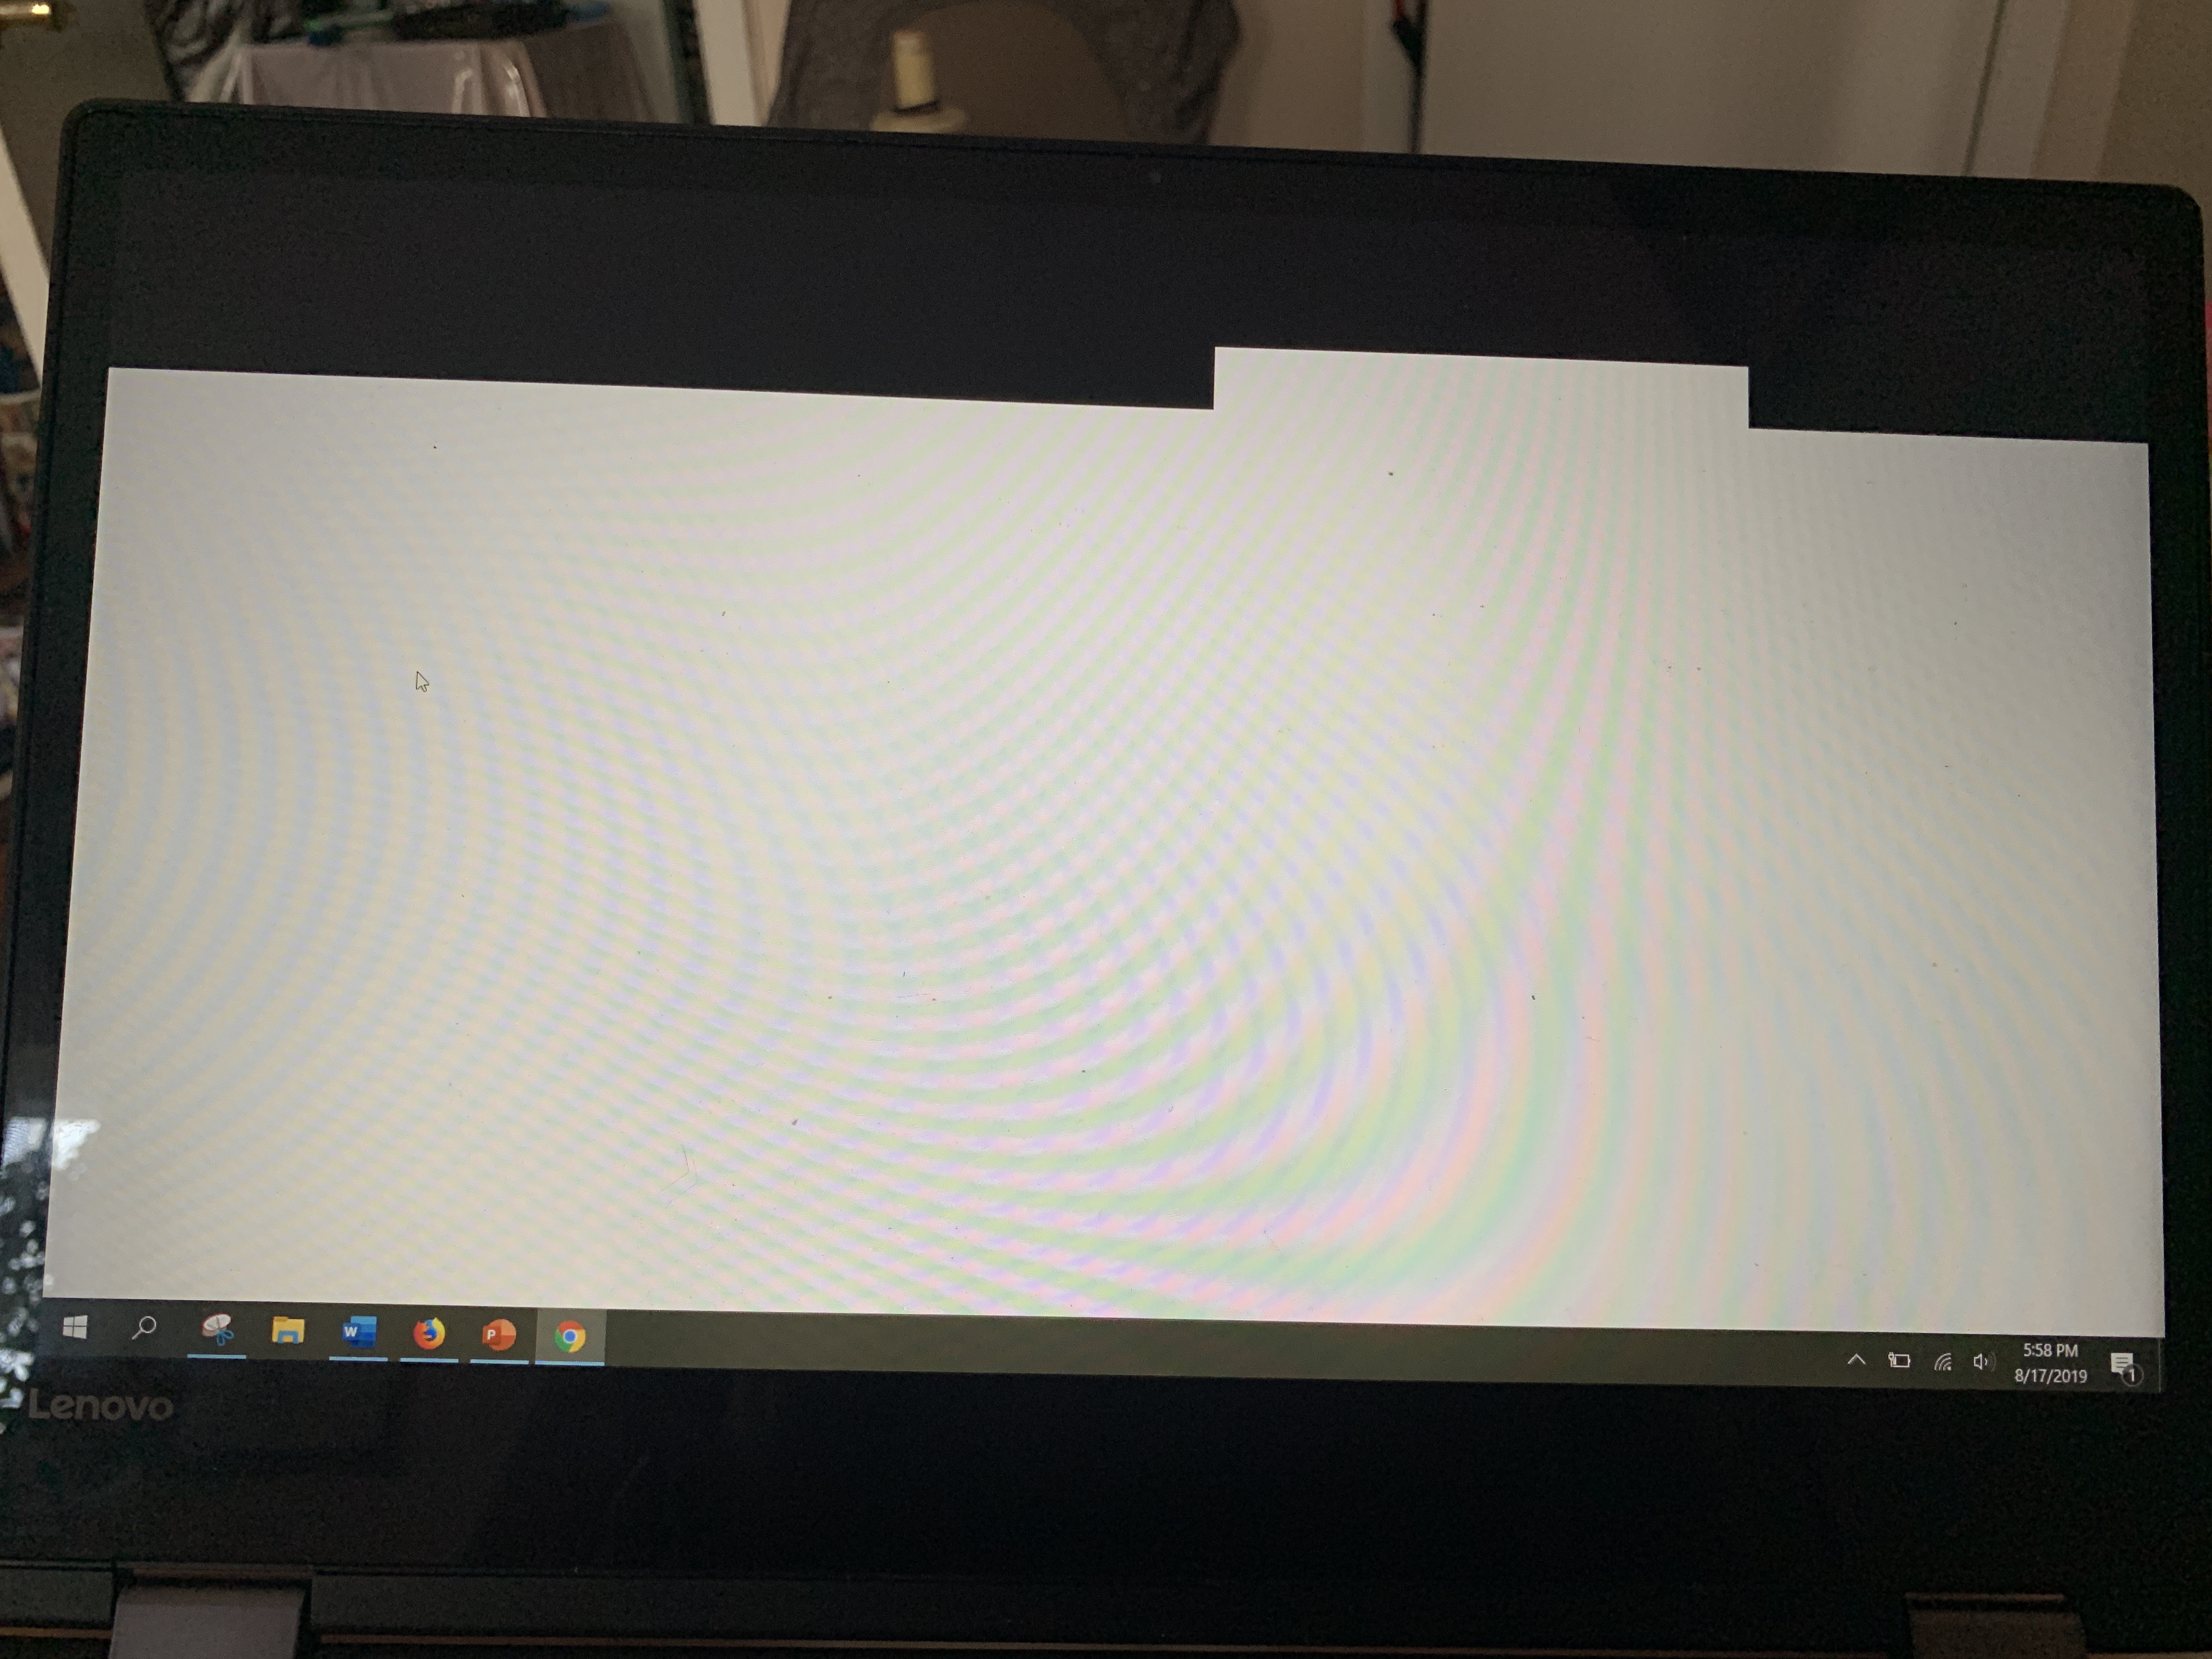 my computer screen is black and white